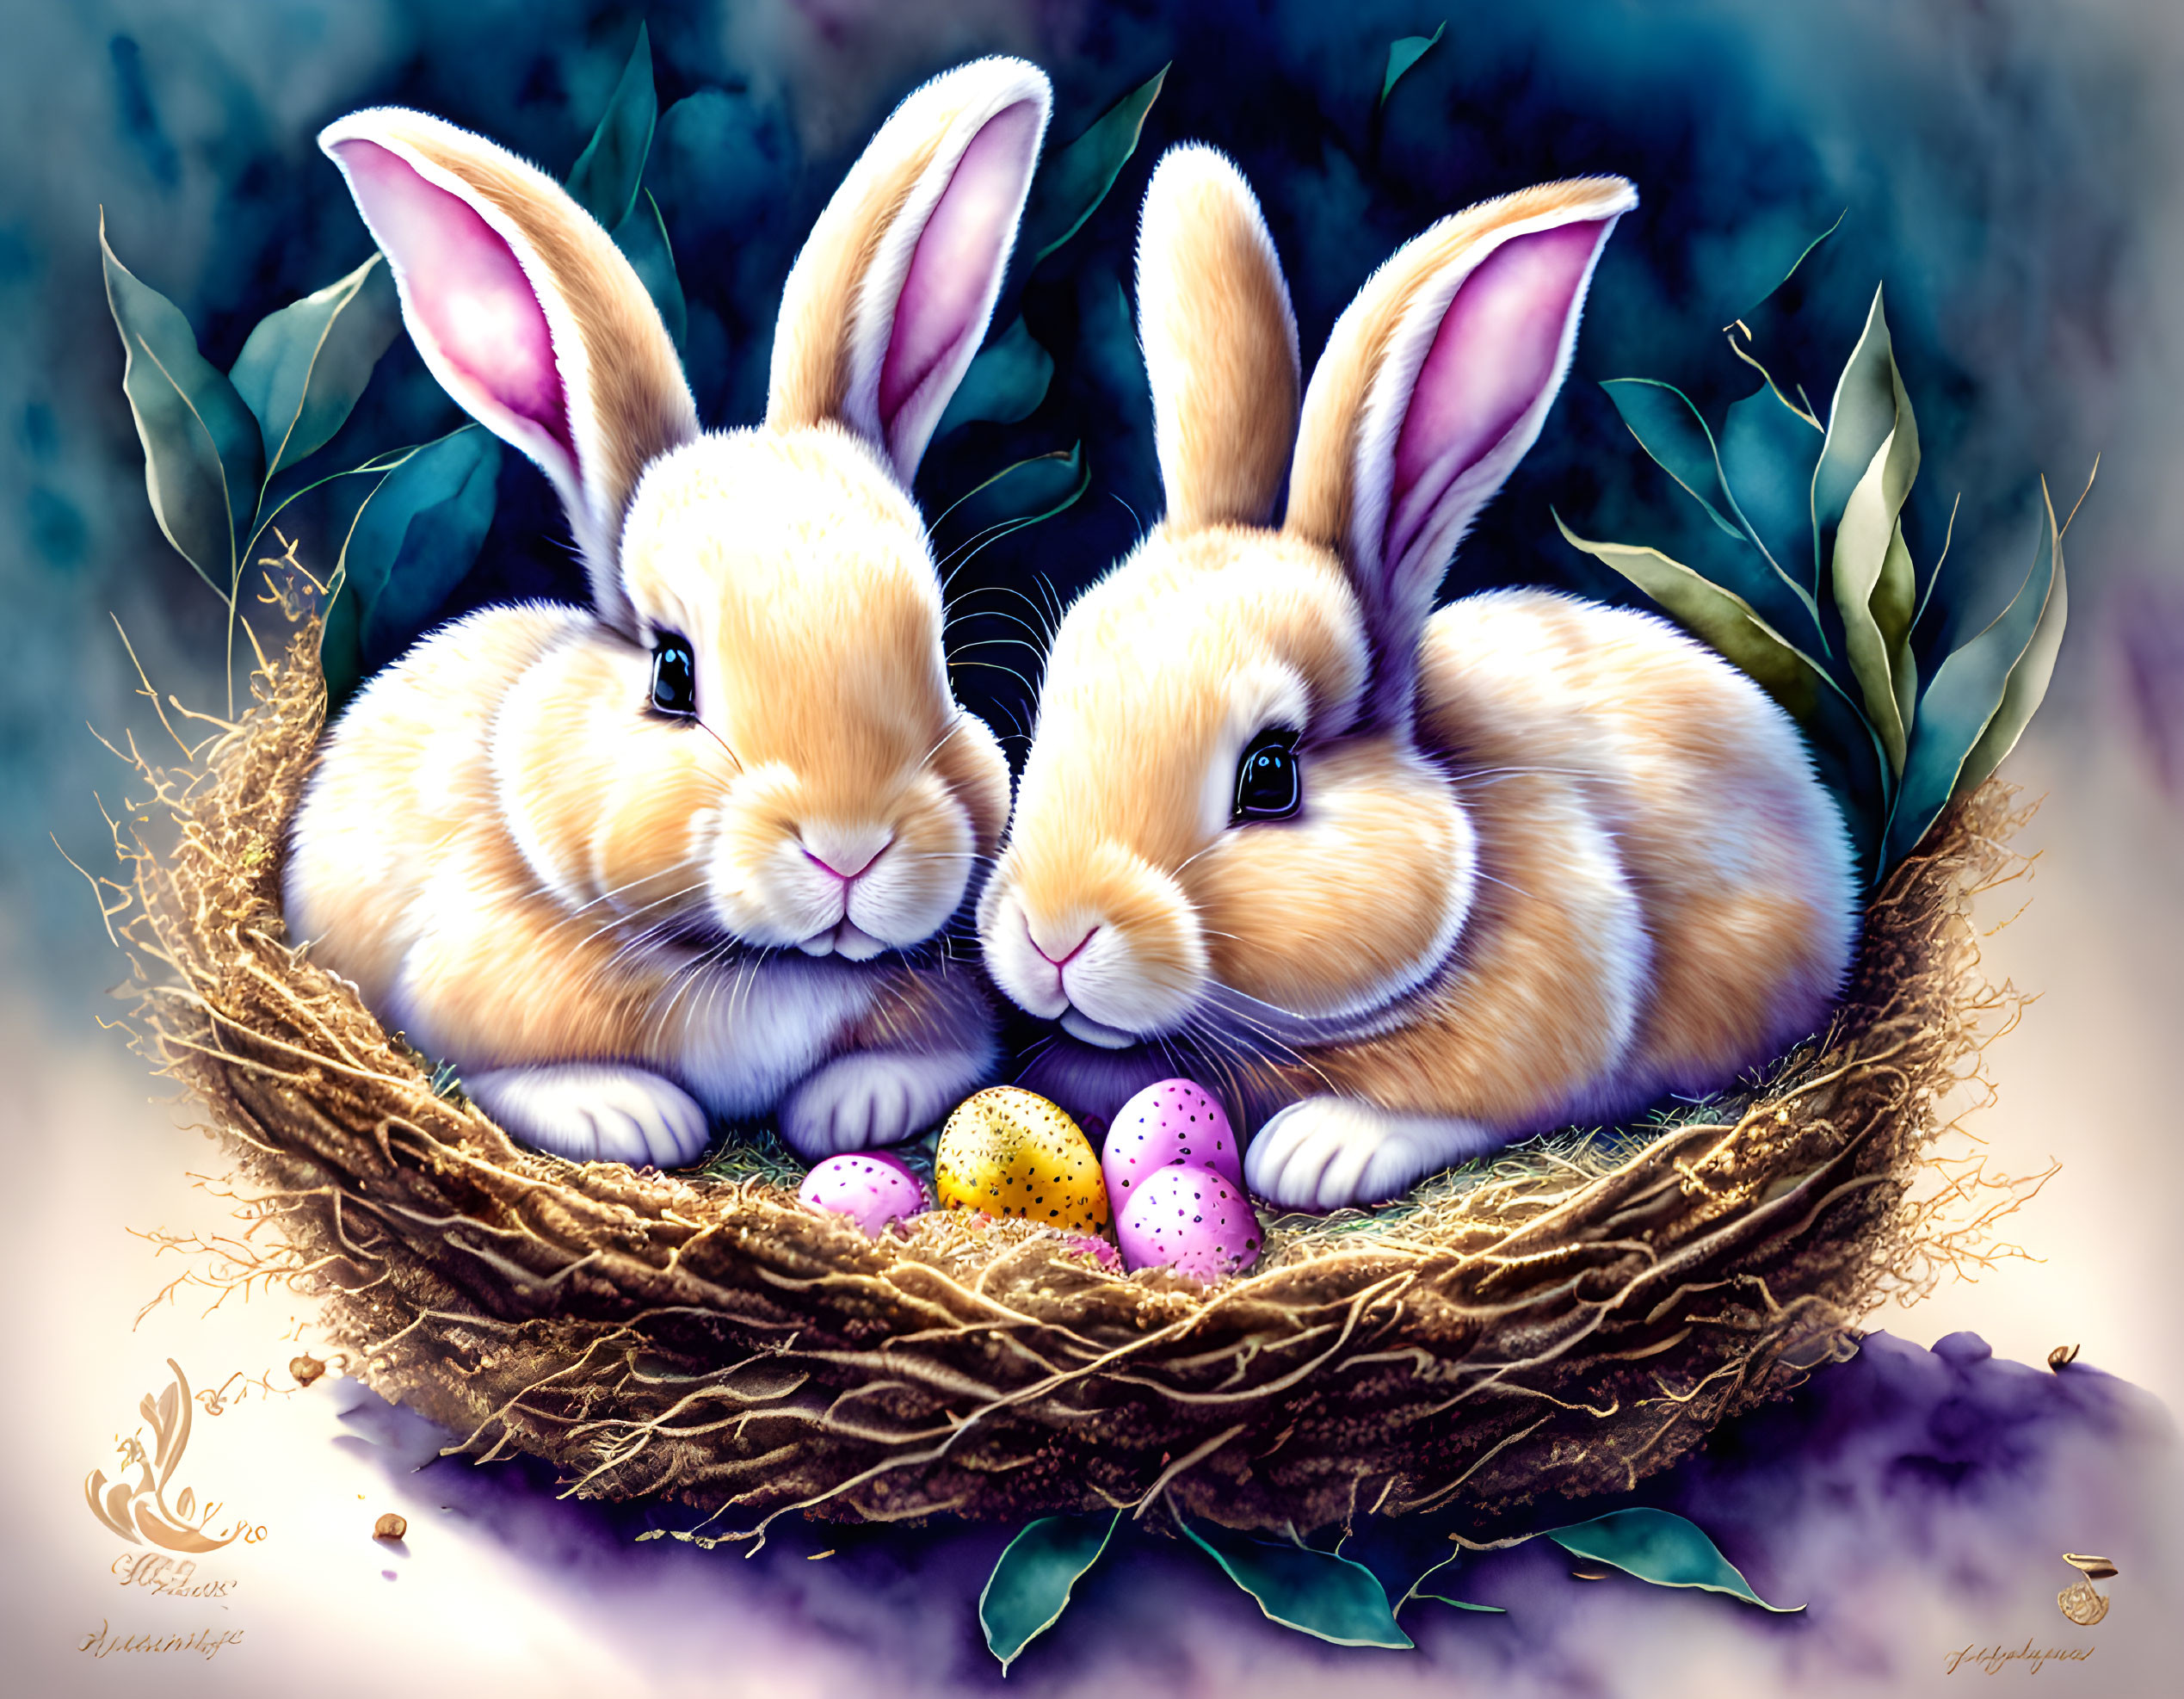 Two cute Easter bunnies in an Easter nest - Waterc